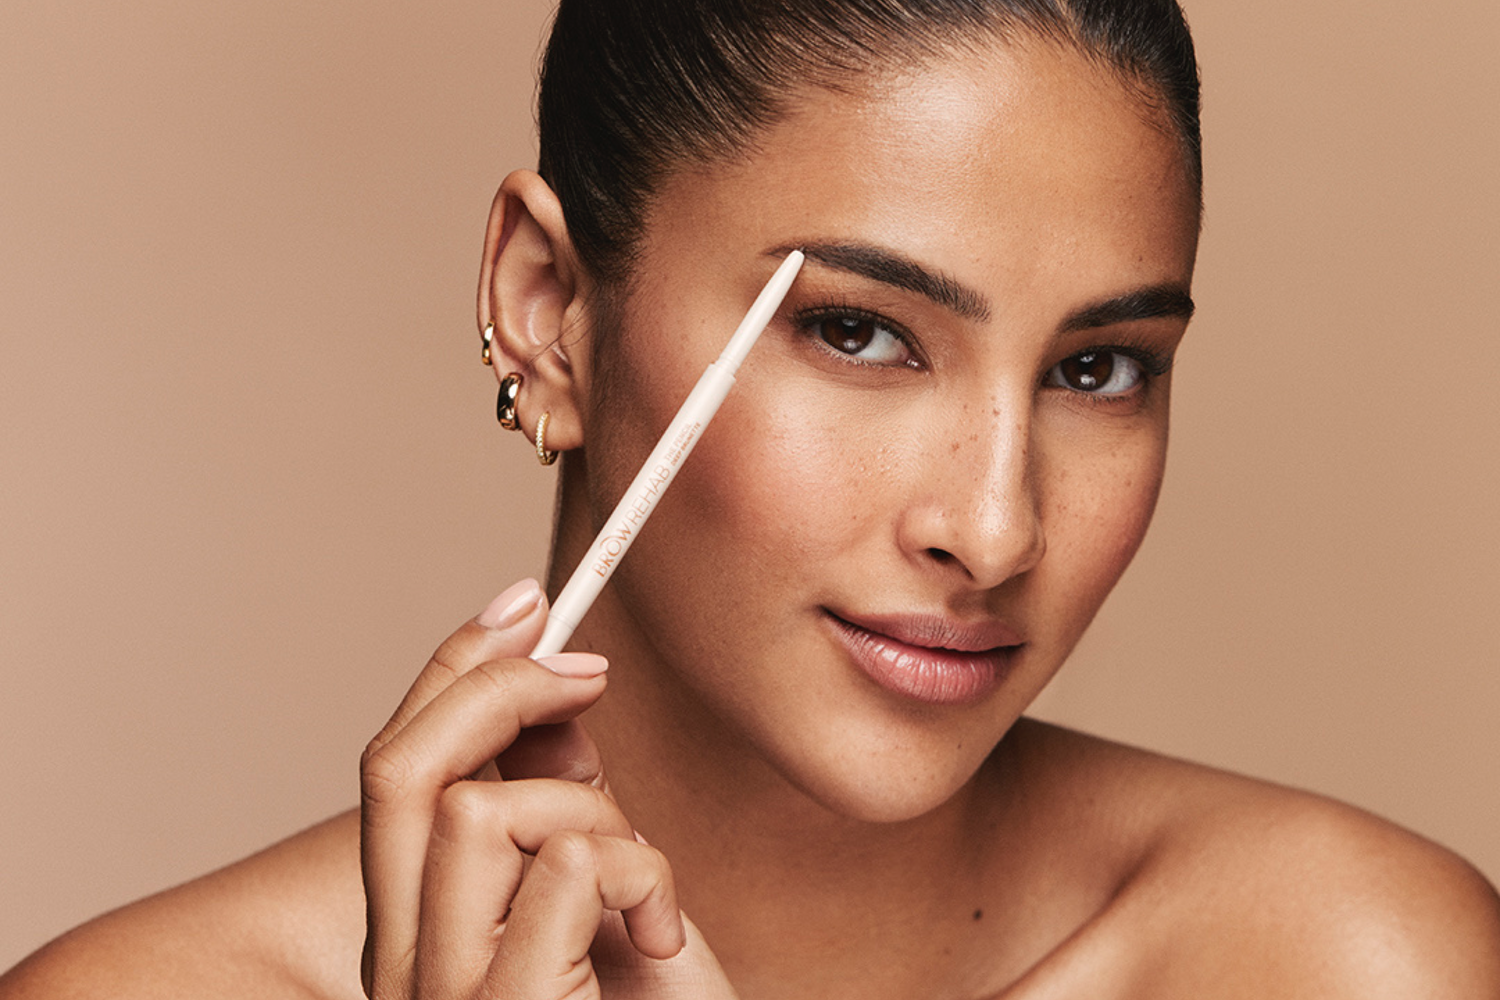 Brow Rehab The Pencil - Taupe